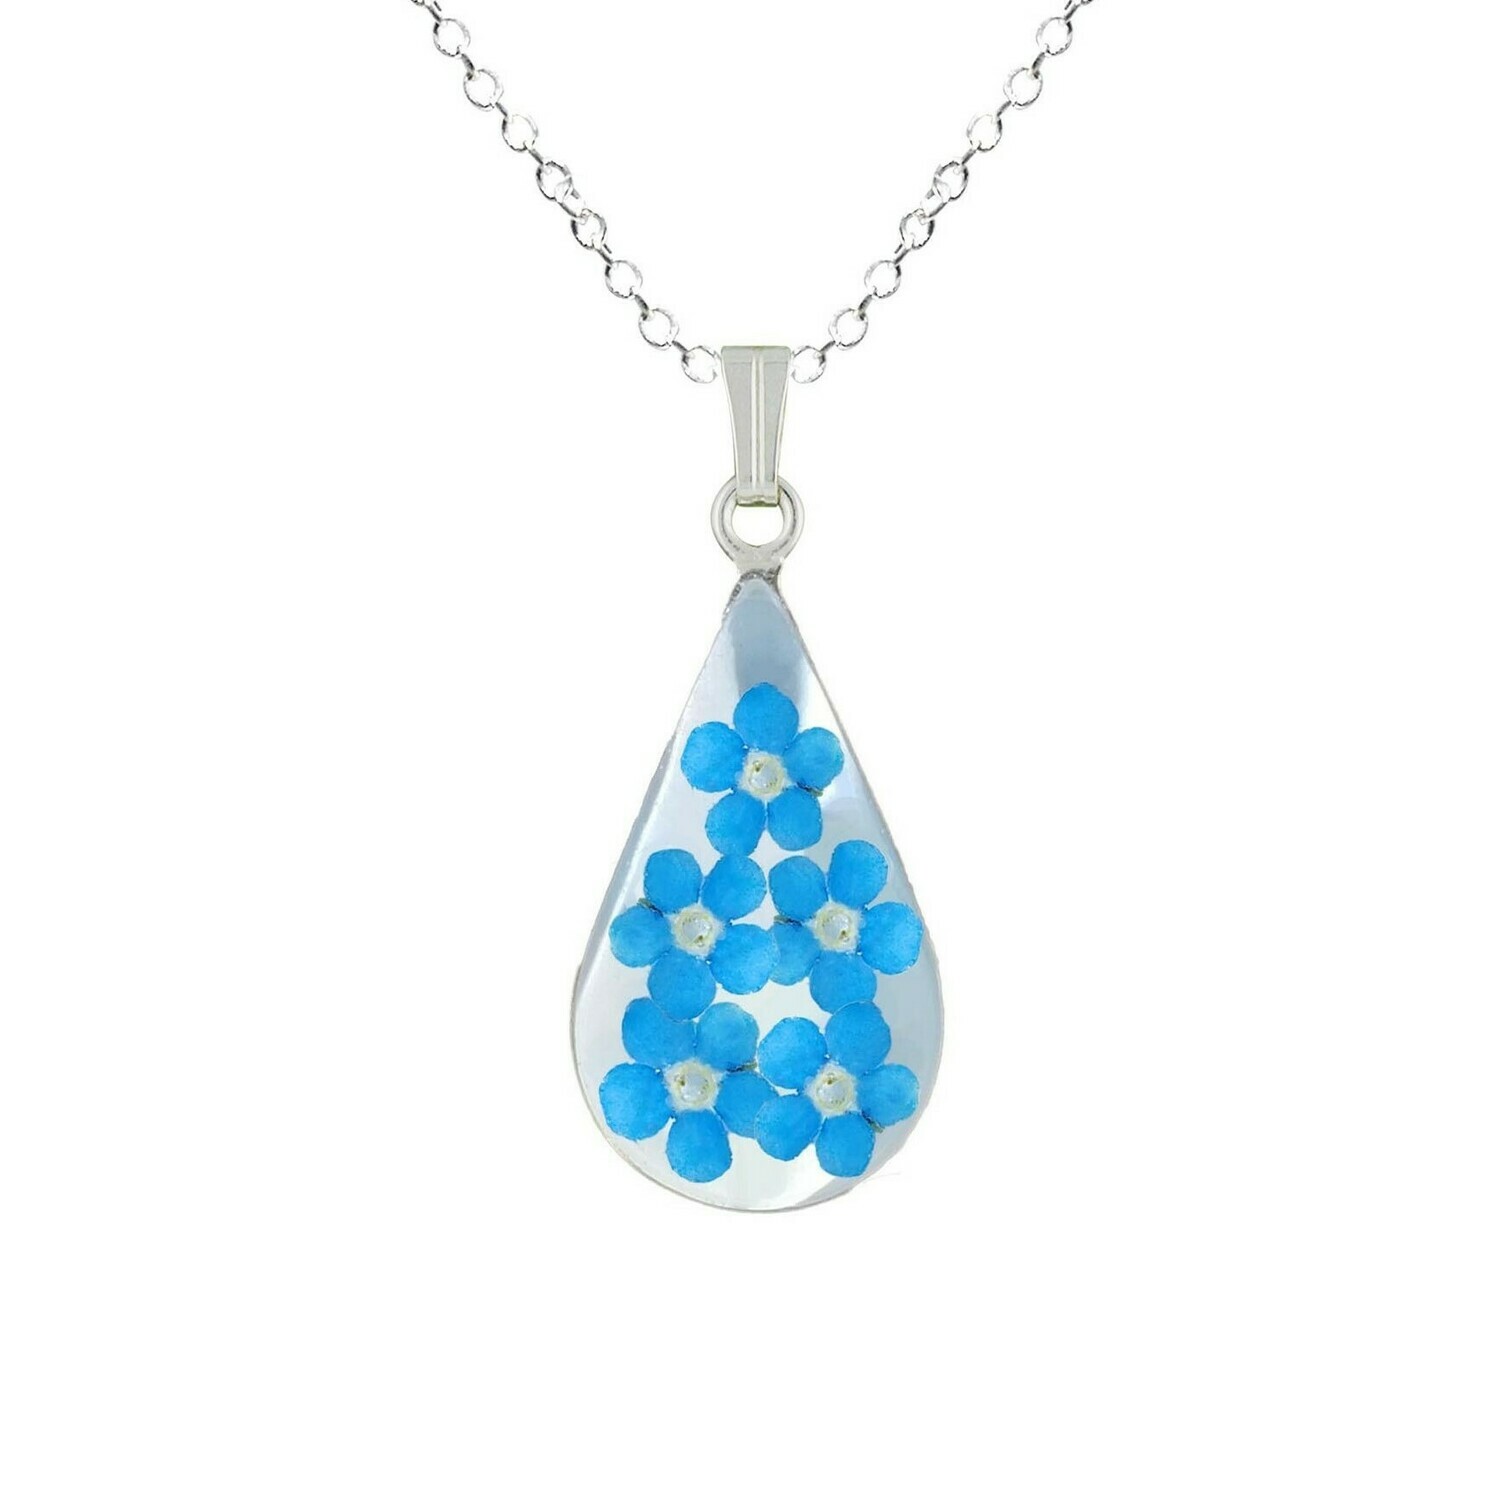 Forget-Me-Not Necklace, Medium Teardrop, White Background